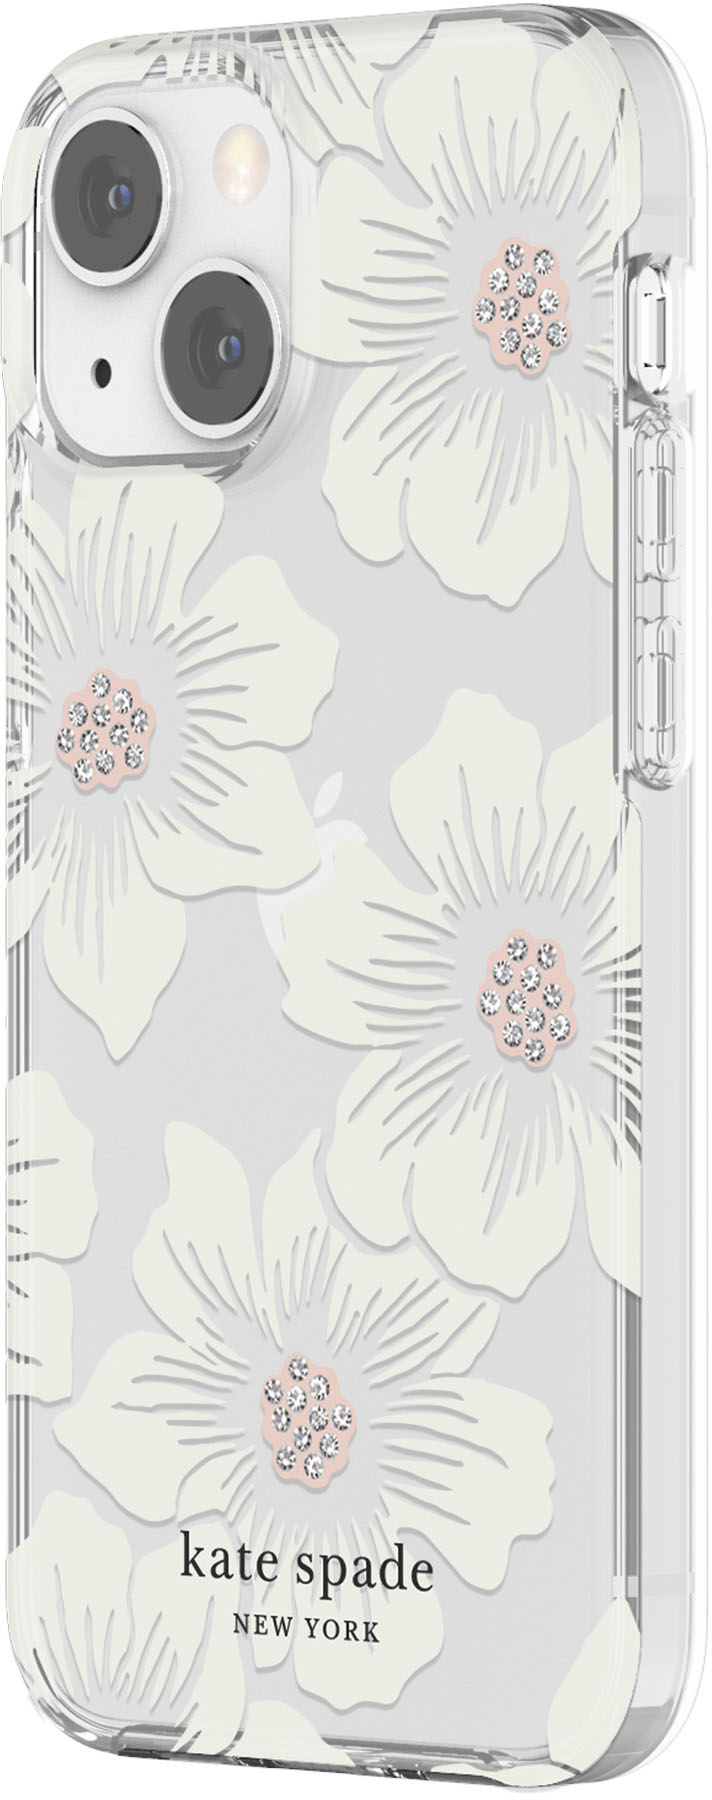 Angle View: kate spade new york - Protective Hardshell Case for iPhone 13 Mini and iPhone 12 Mini - Hollyhock